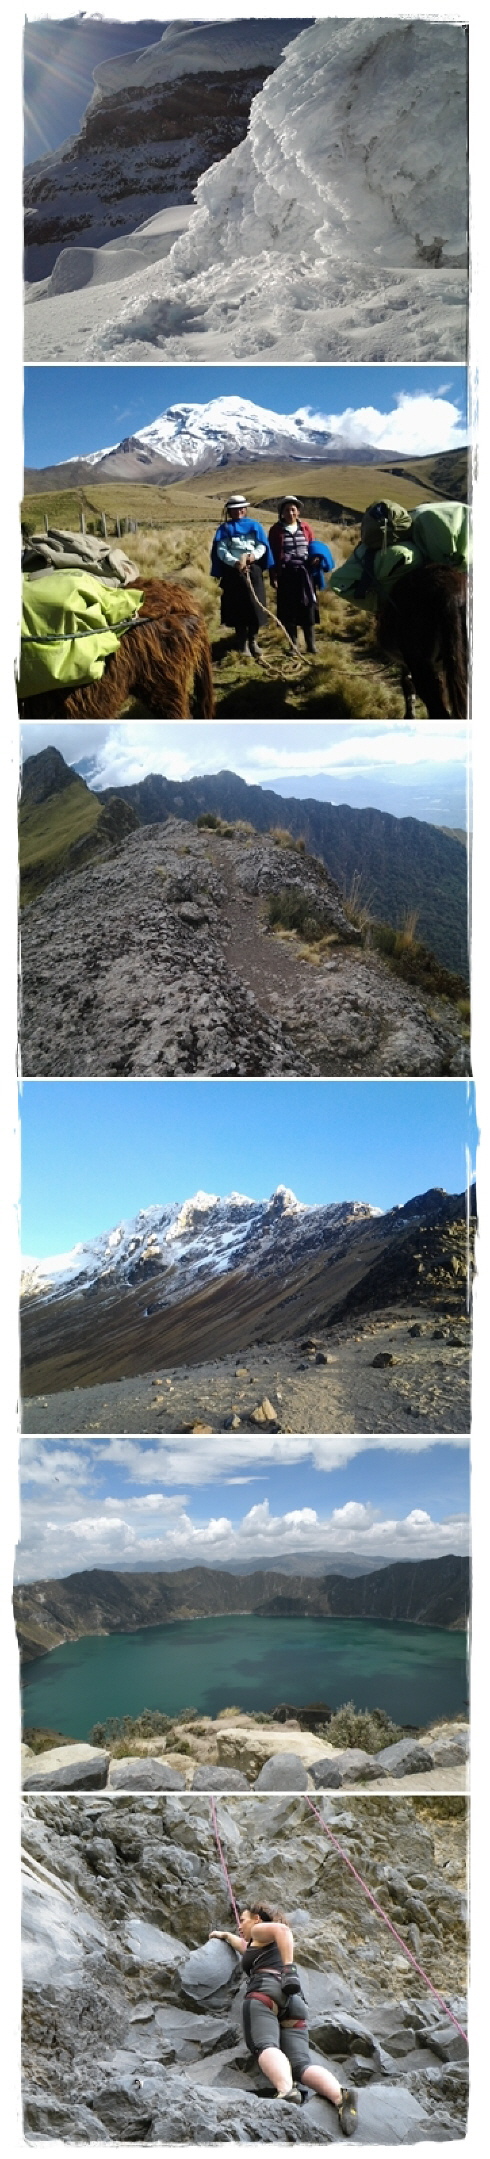 steadily up, from Quito to Chimborazo (6.263 m / 20.549 ft)